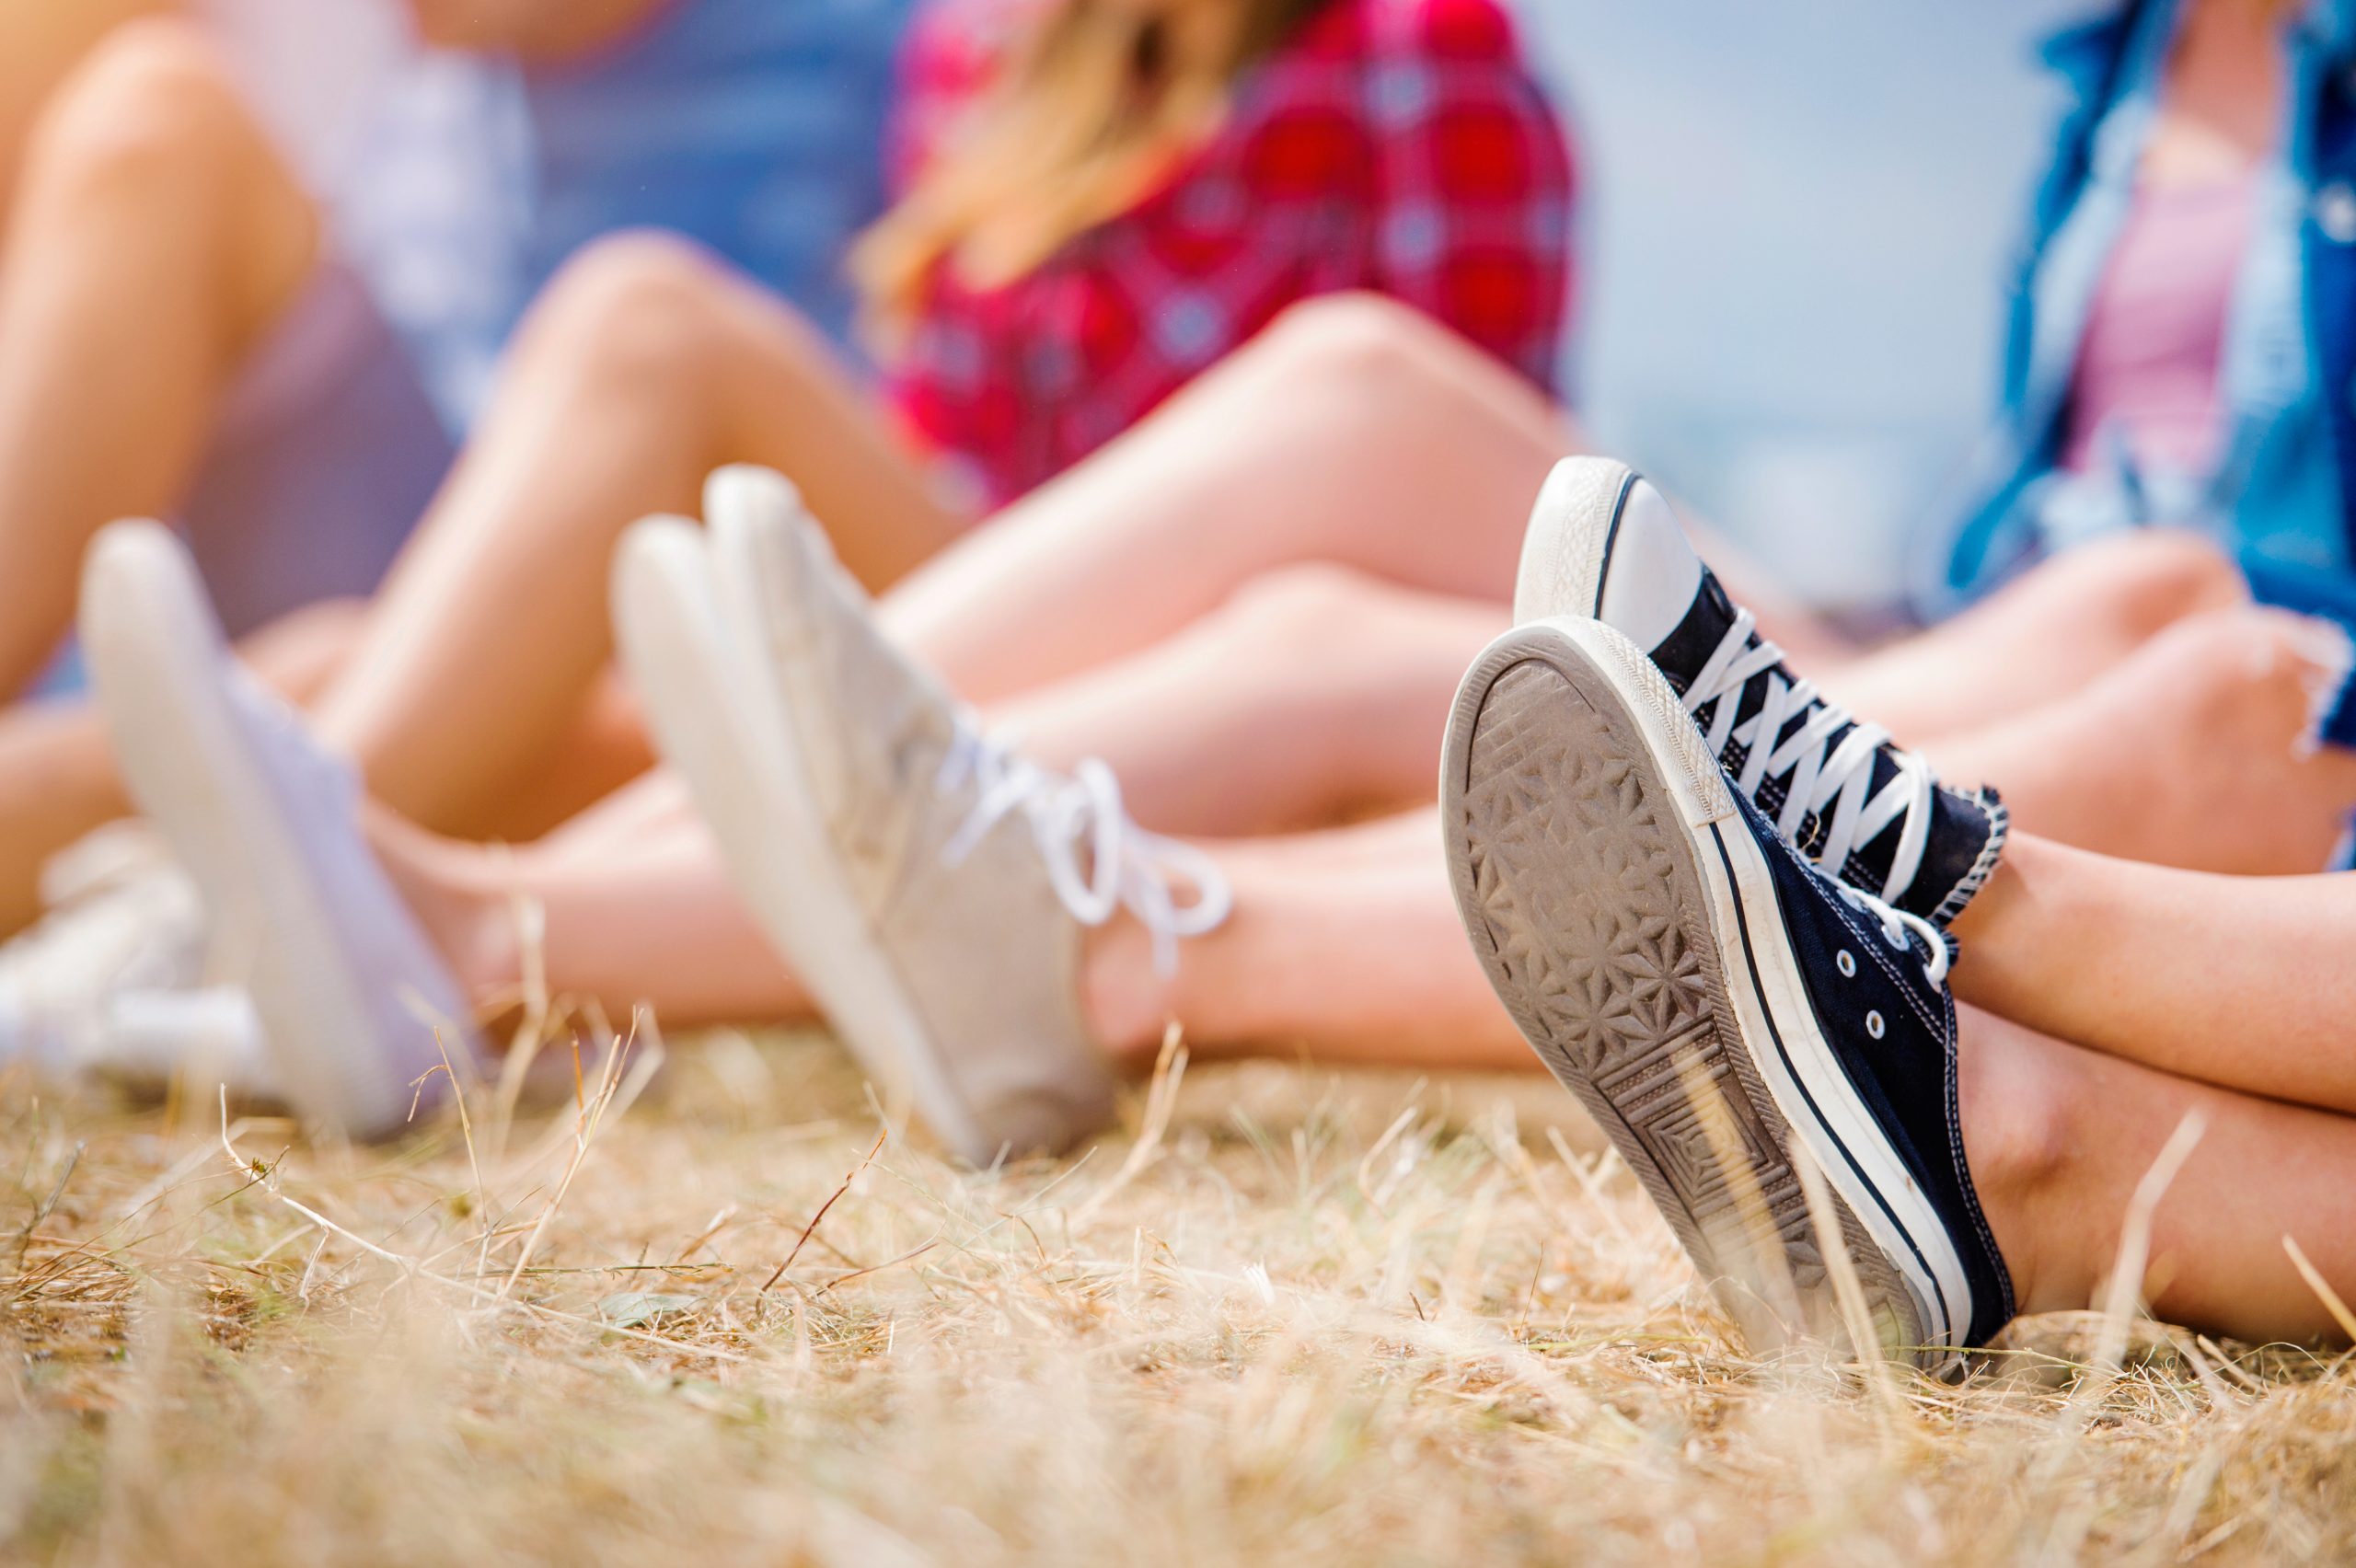 legs-of-teenagers-at-summer-music-festival-canvas-shoes-sitting-on-the-grass-in-front-SBI-305195361-scaled-2